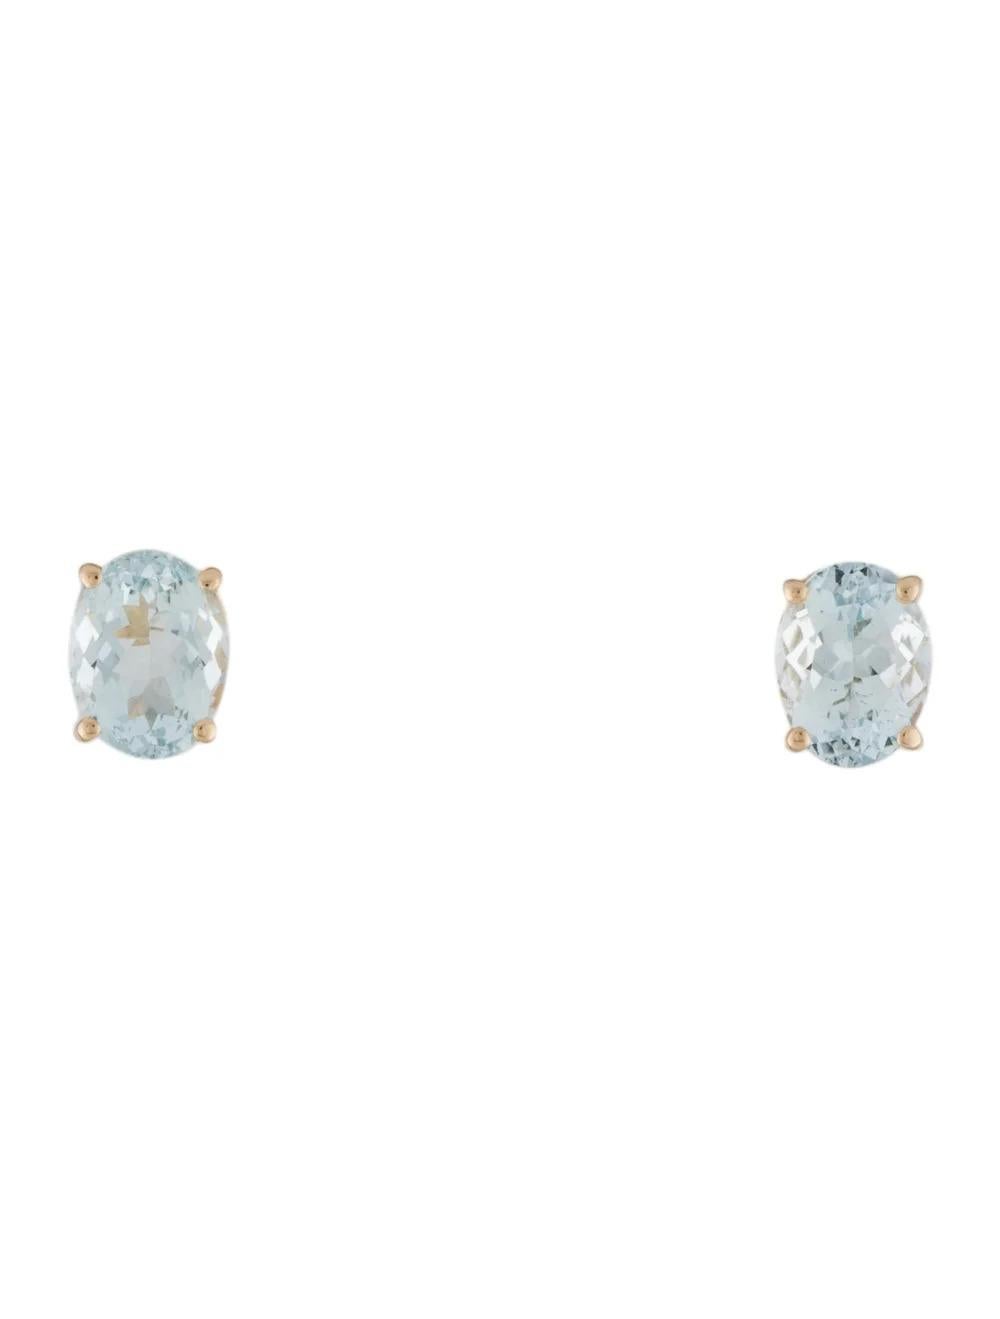 Indulge in timeless elegance with these exquisite 14K yellow gold stud earrings, adorned with captivating oval aquamarines. Crafted with precision and finesse, these earrings exude sophistication and grace.

Specifications:

* Metal Type: 14K Yellow